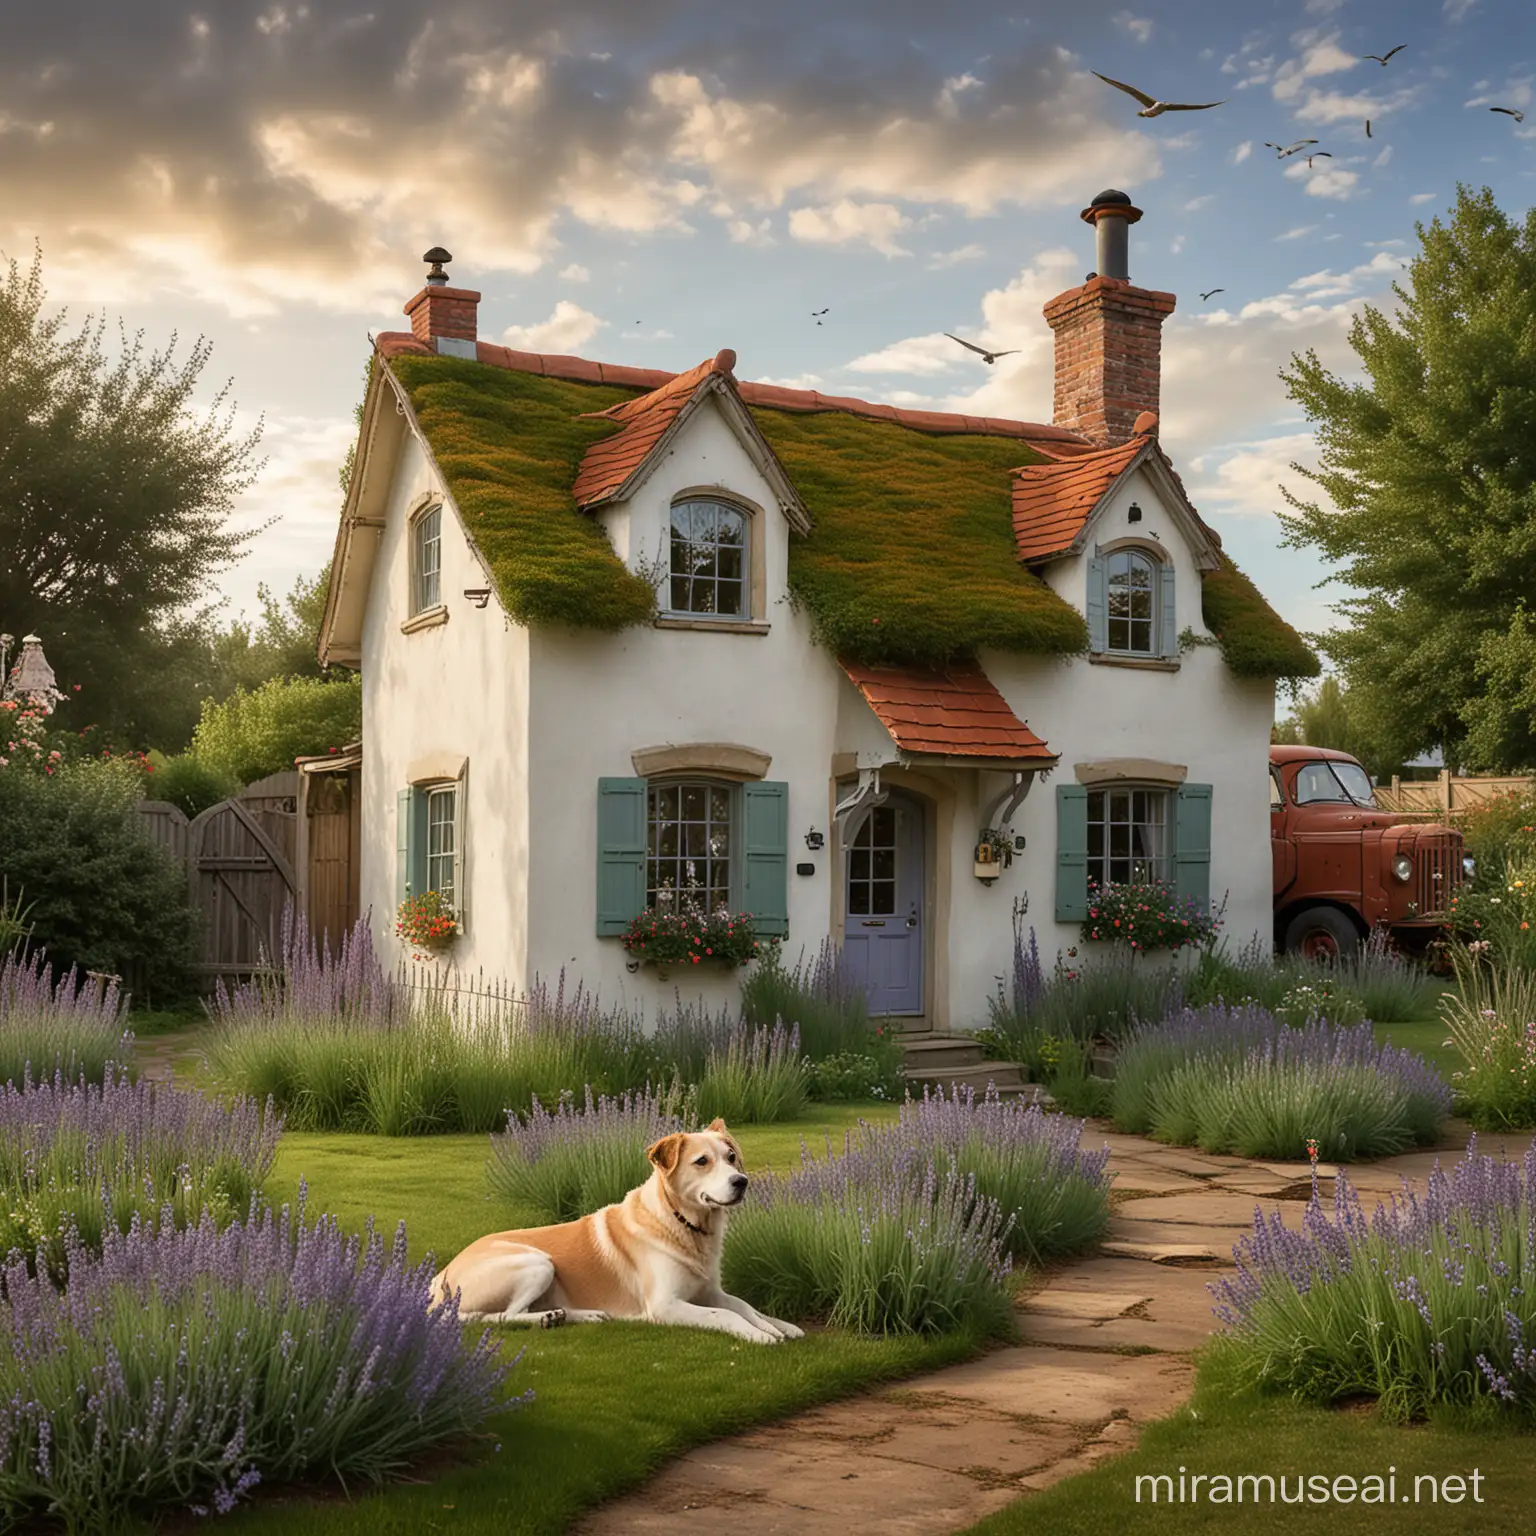 Whimsical Crooked Cottage with Lavender Garden and Rusty Pickup Truck